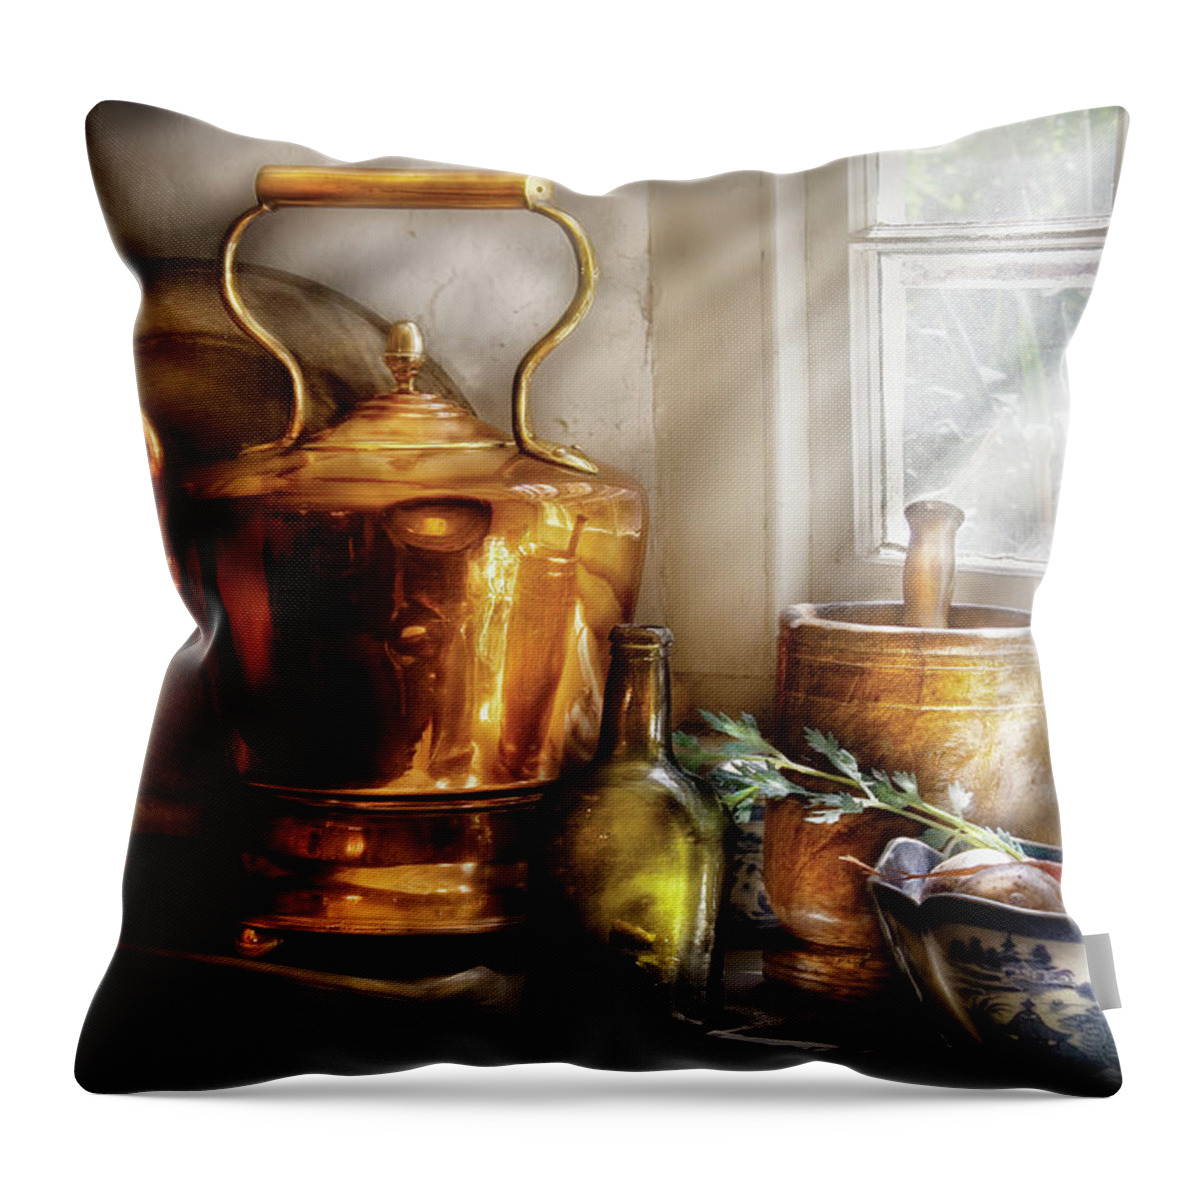 Coffee Throw Pillow featuring the photograph Kettle - Cherished Memories by Mike Savad